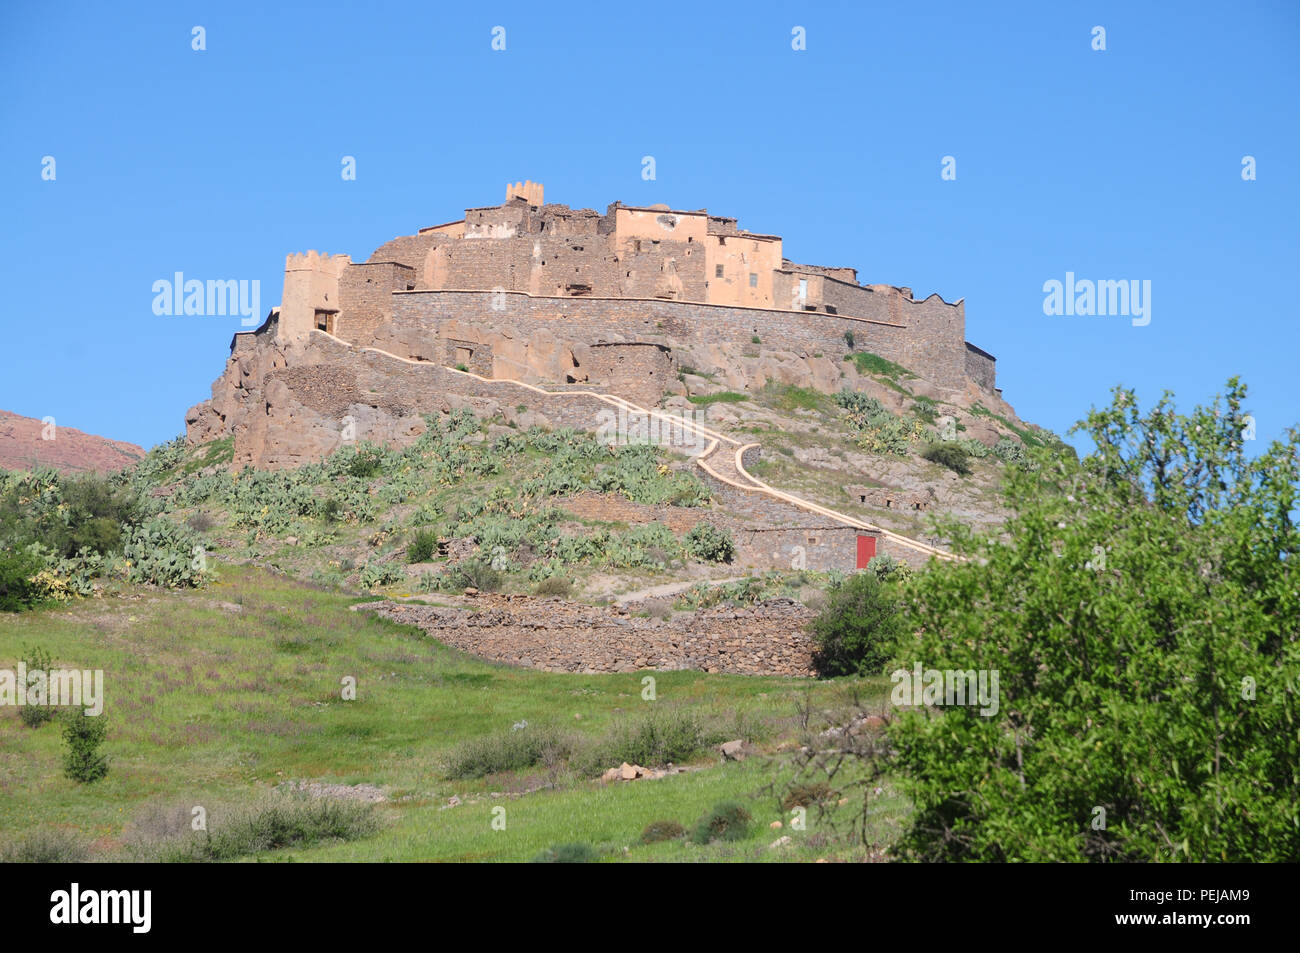 Kasbah Tizourgane, a fortified village in the Anti Atlas mountains of Morocco Stock Photo